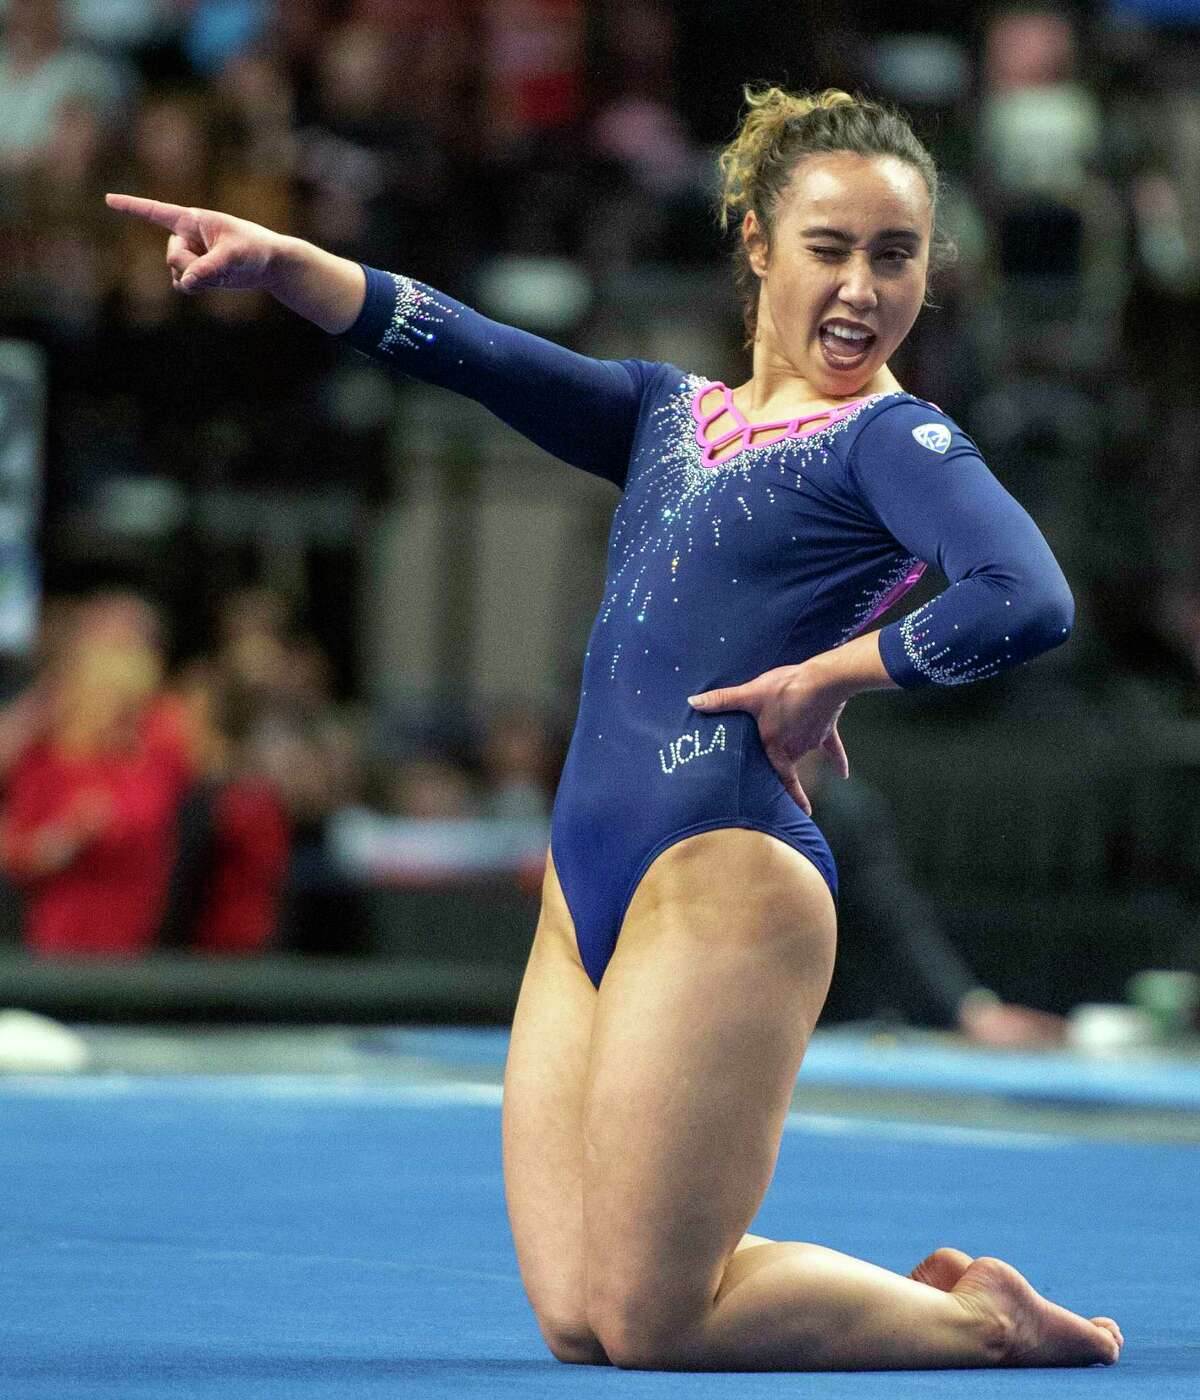 FILE - In this March 23, 2019, file photo, UCLA's Katelyn Ohashi competes on the floor, earning a 10, during the Pac-12 gymnastics championships in Salt Lake City. The former UCLA gymnast has committed to performing in the inaugural Aurora Games, an all-women?s sports and entertainment festival. The Aurora Games will be held Aug. 20-25 in Albany, N.Y., and feature about 150 world-class athletes, including Olympic medalists and national champions. (Rick Egan/The Salt Lake Tribune via AP, File)